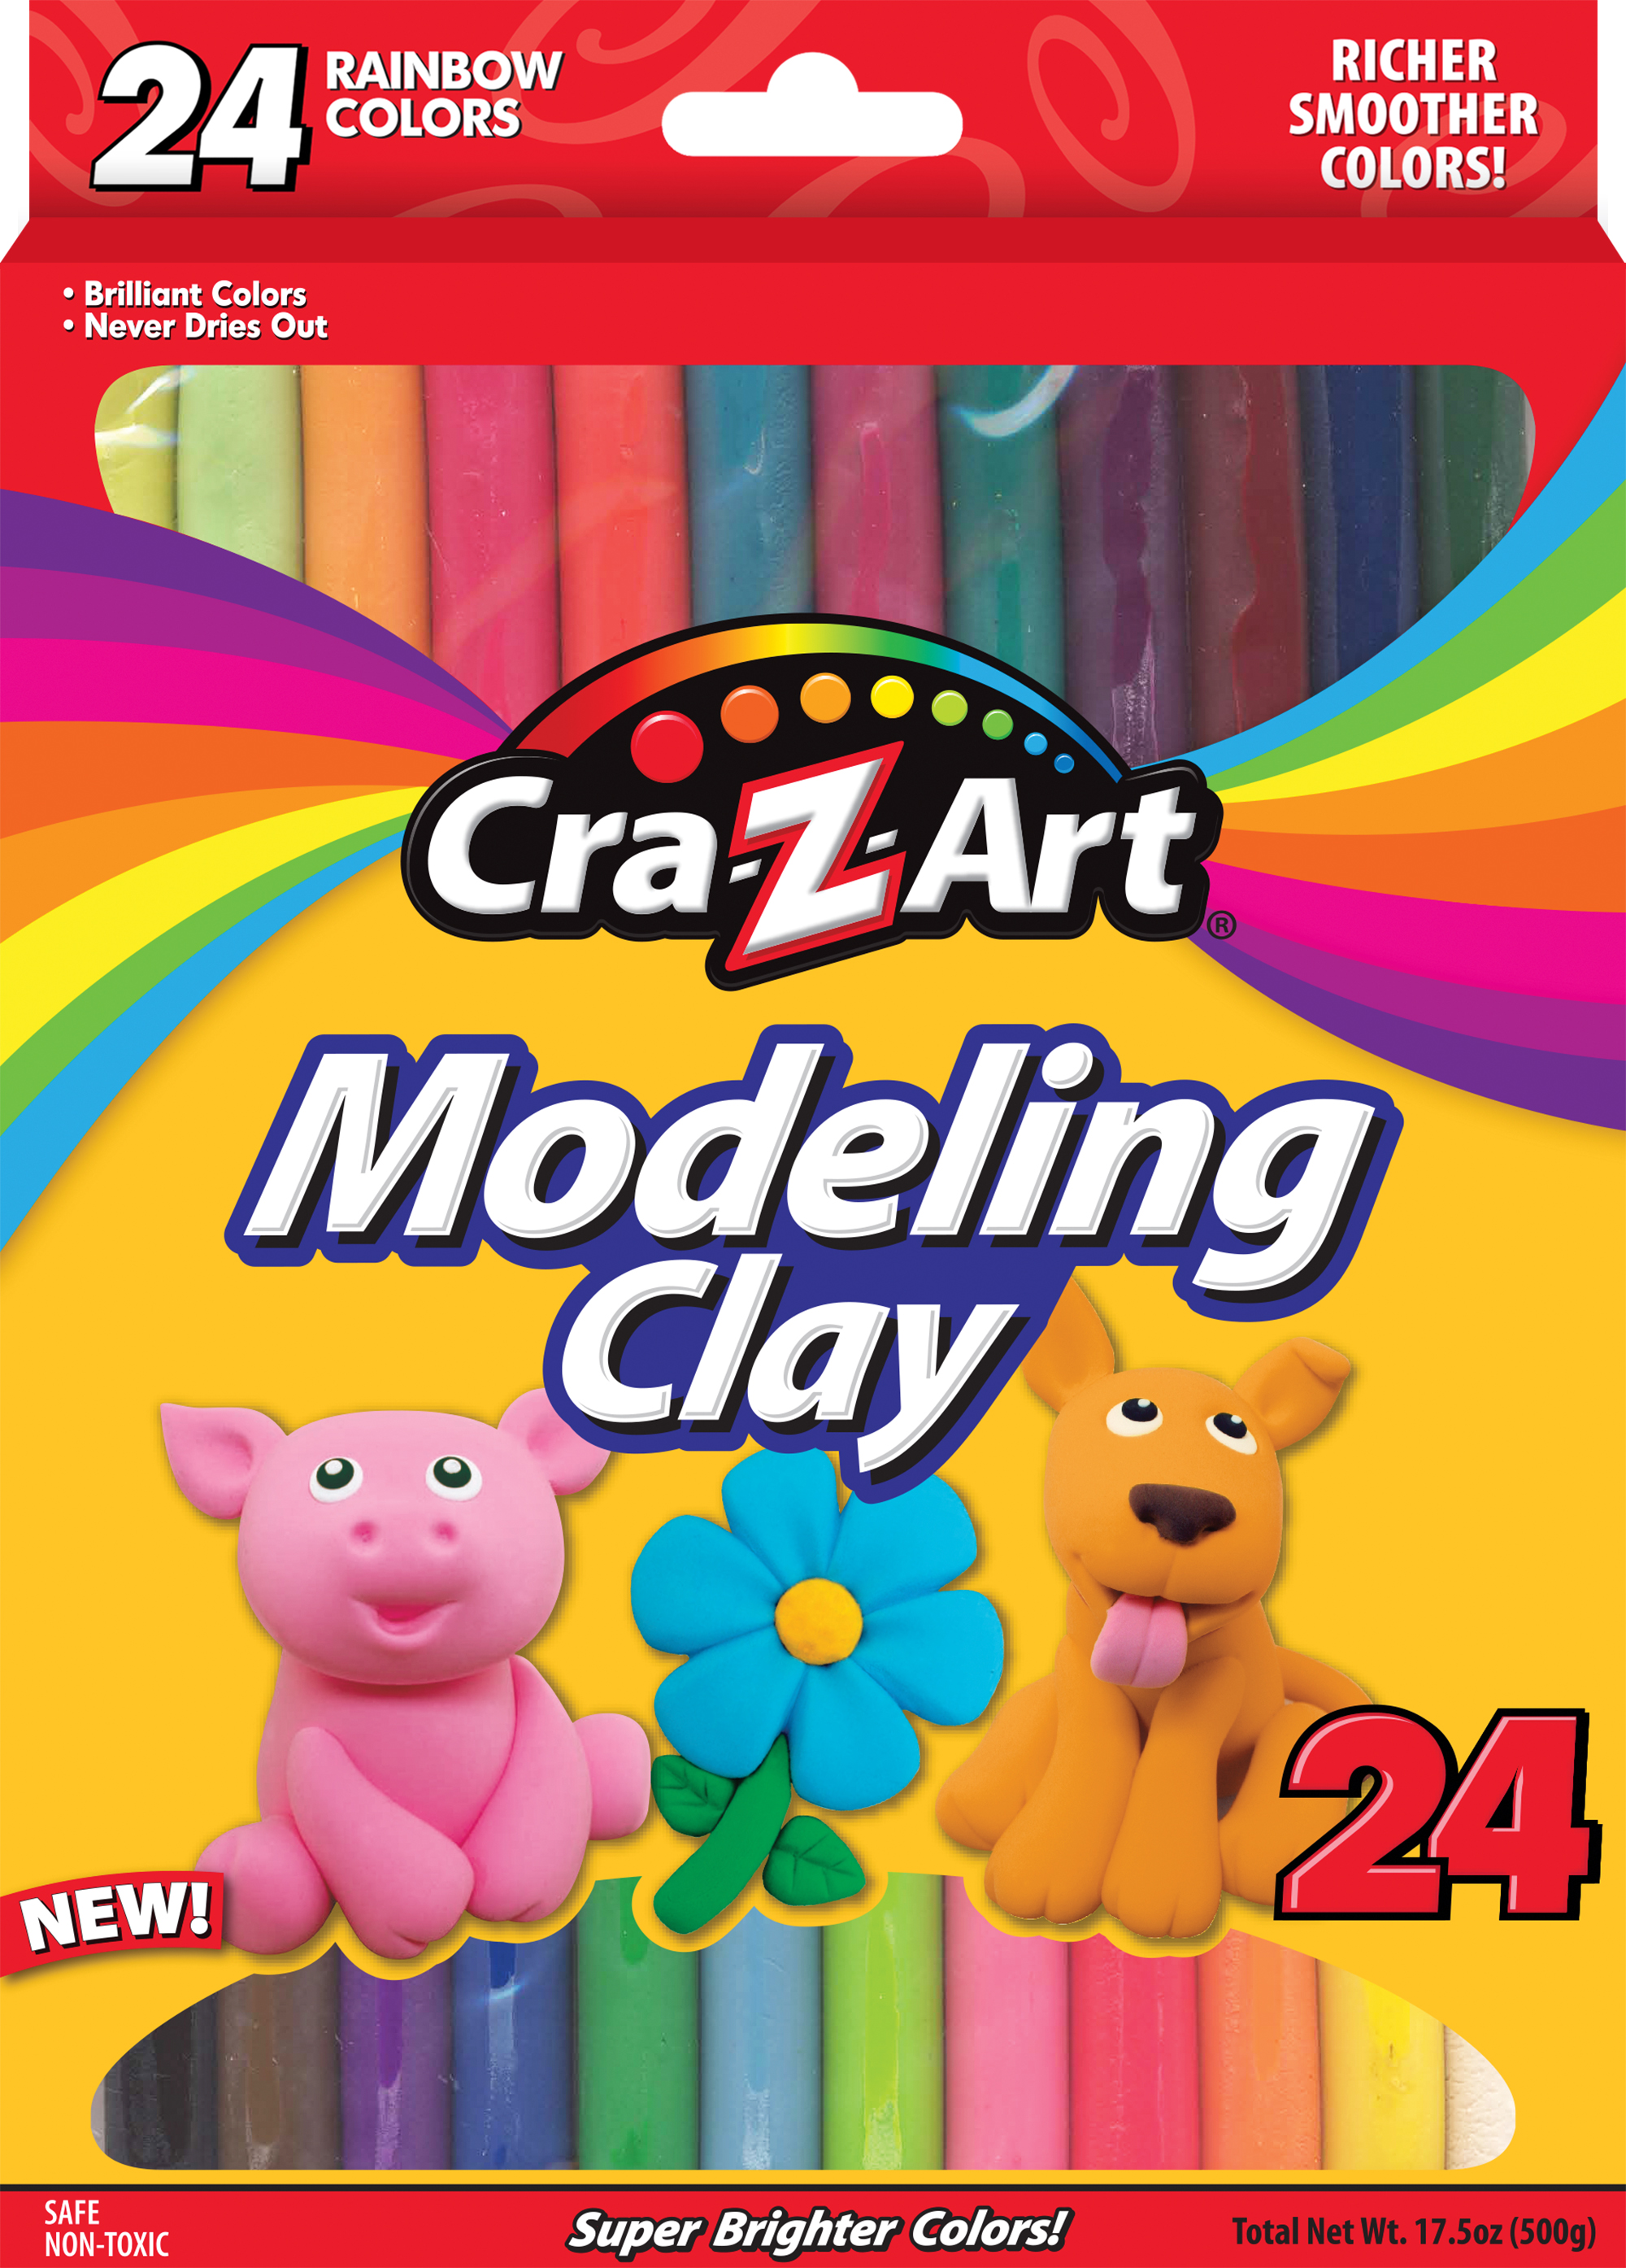 Cra-Z-Art Modeling Clay, 24 Count, Back to School Supplies - image 1 of 3